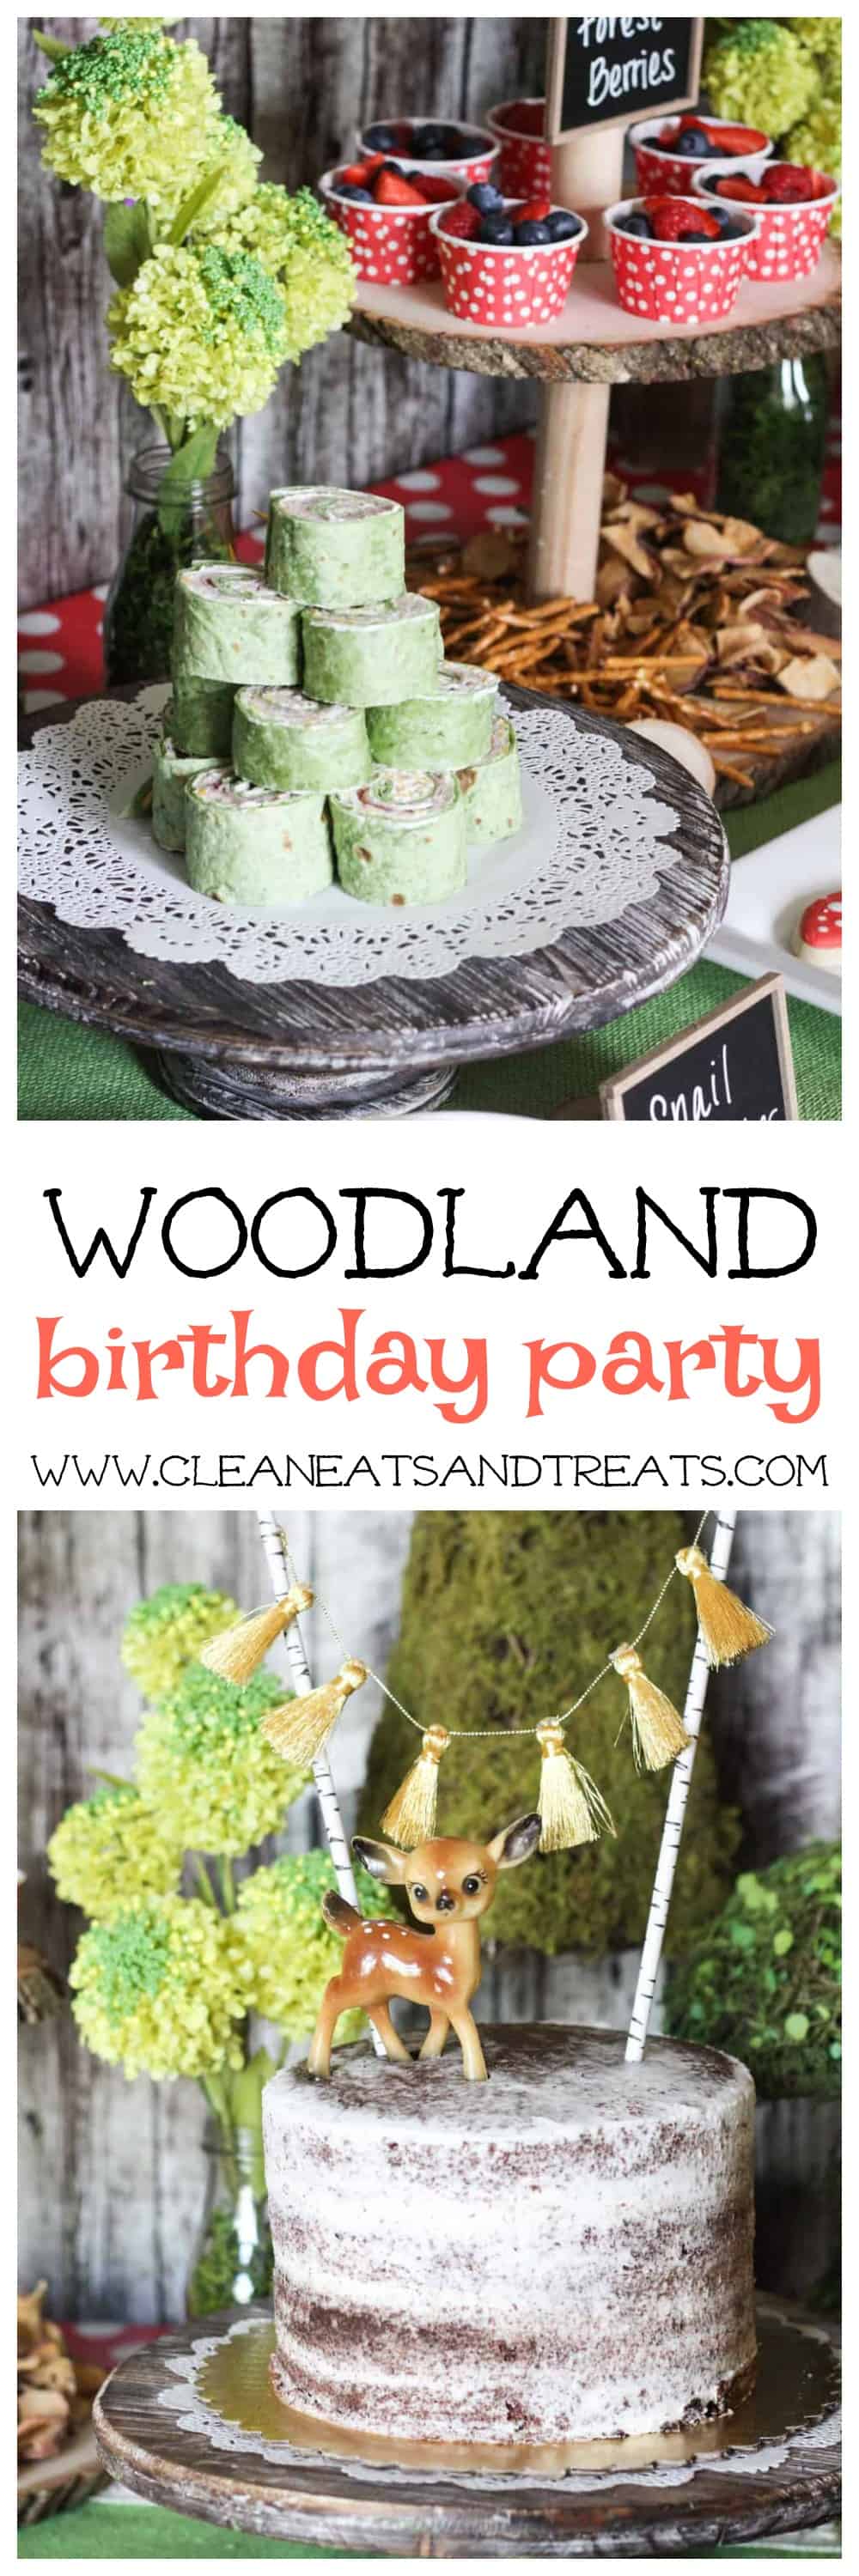 Woodland Party Decoration Ideas - Live Like You Are Rich